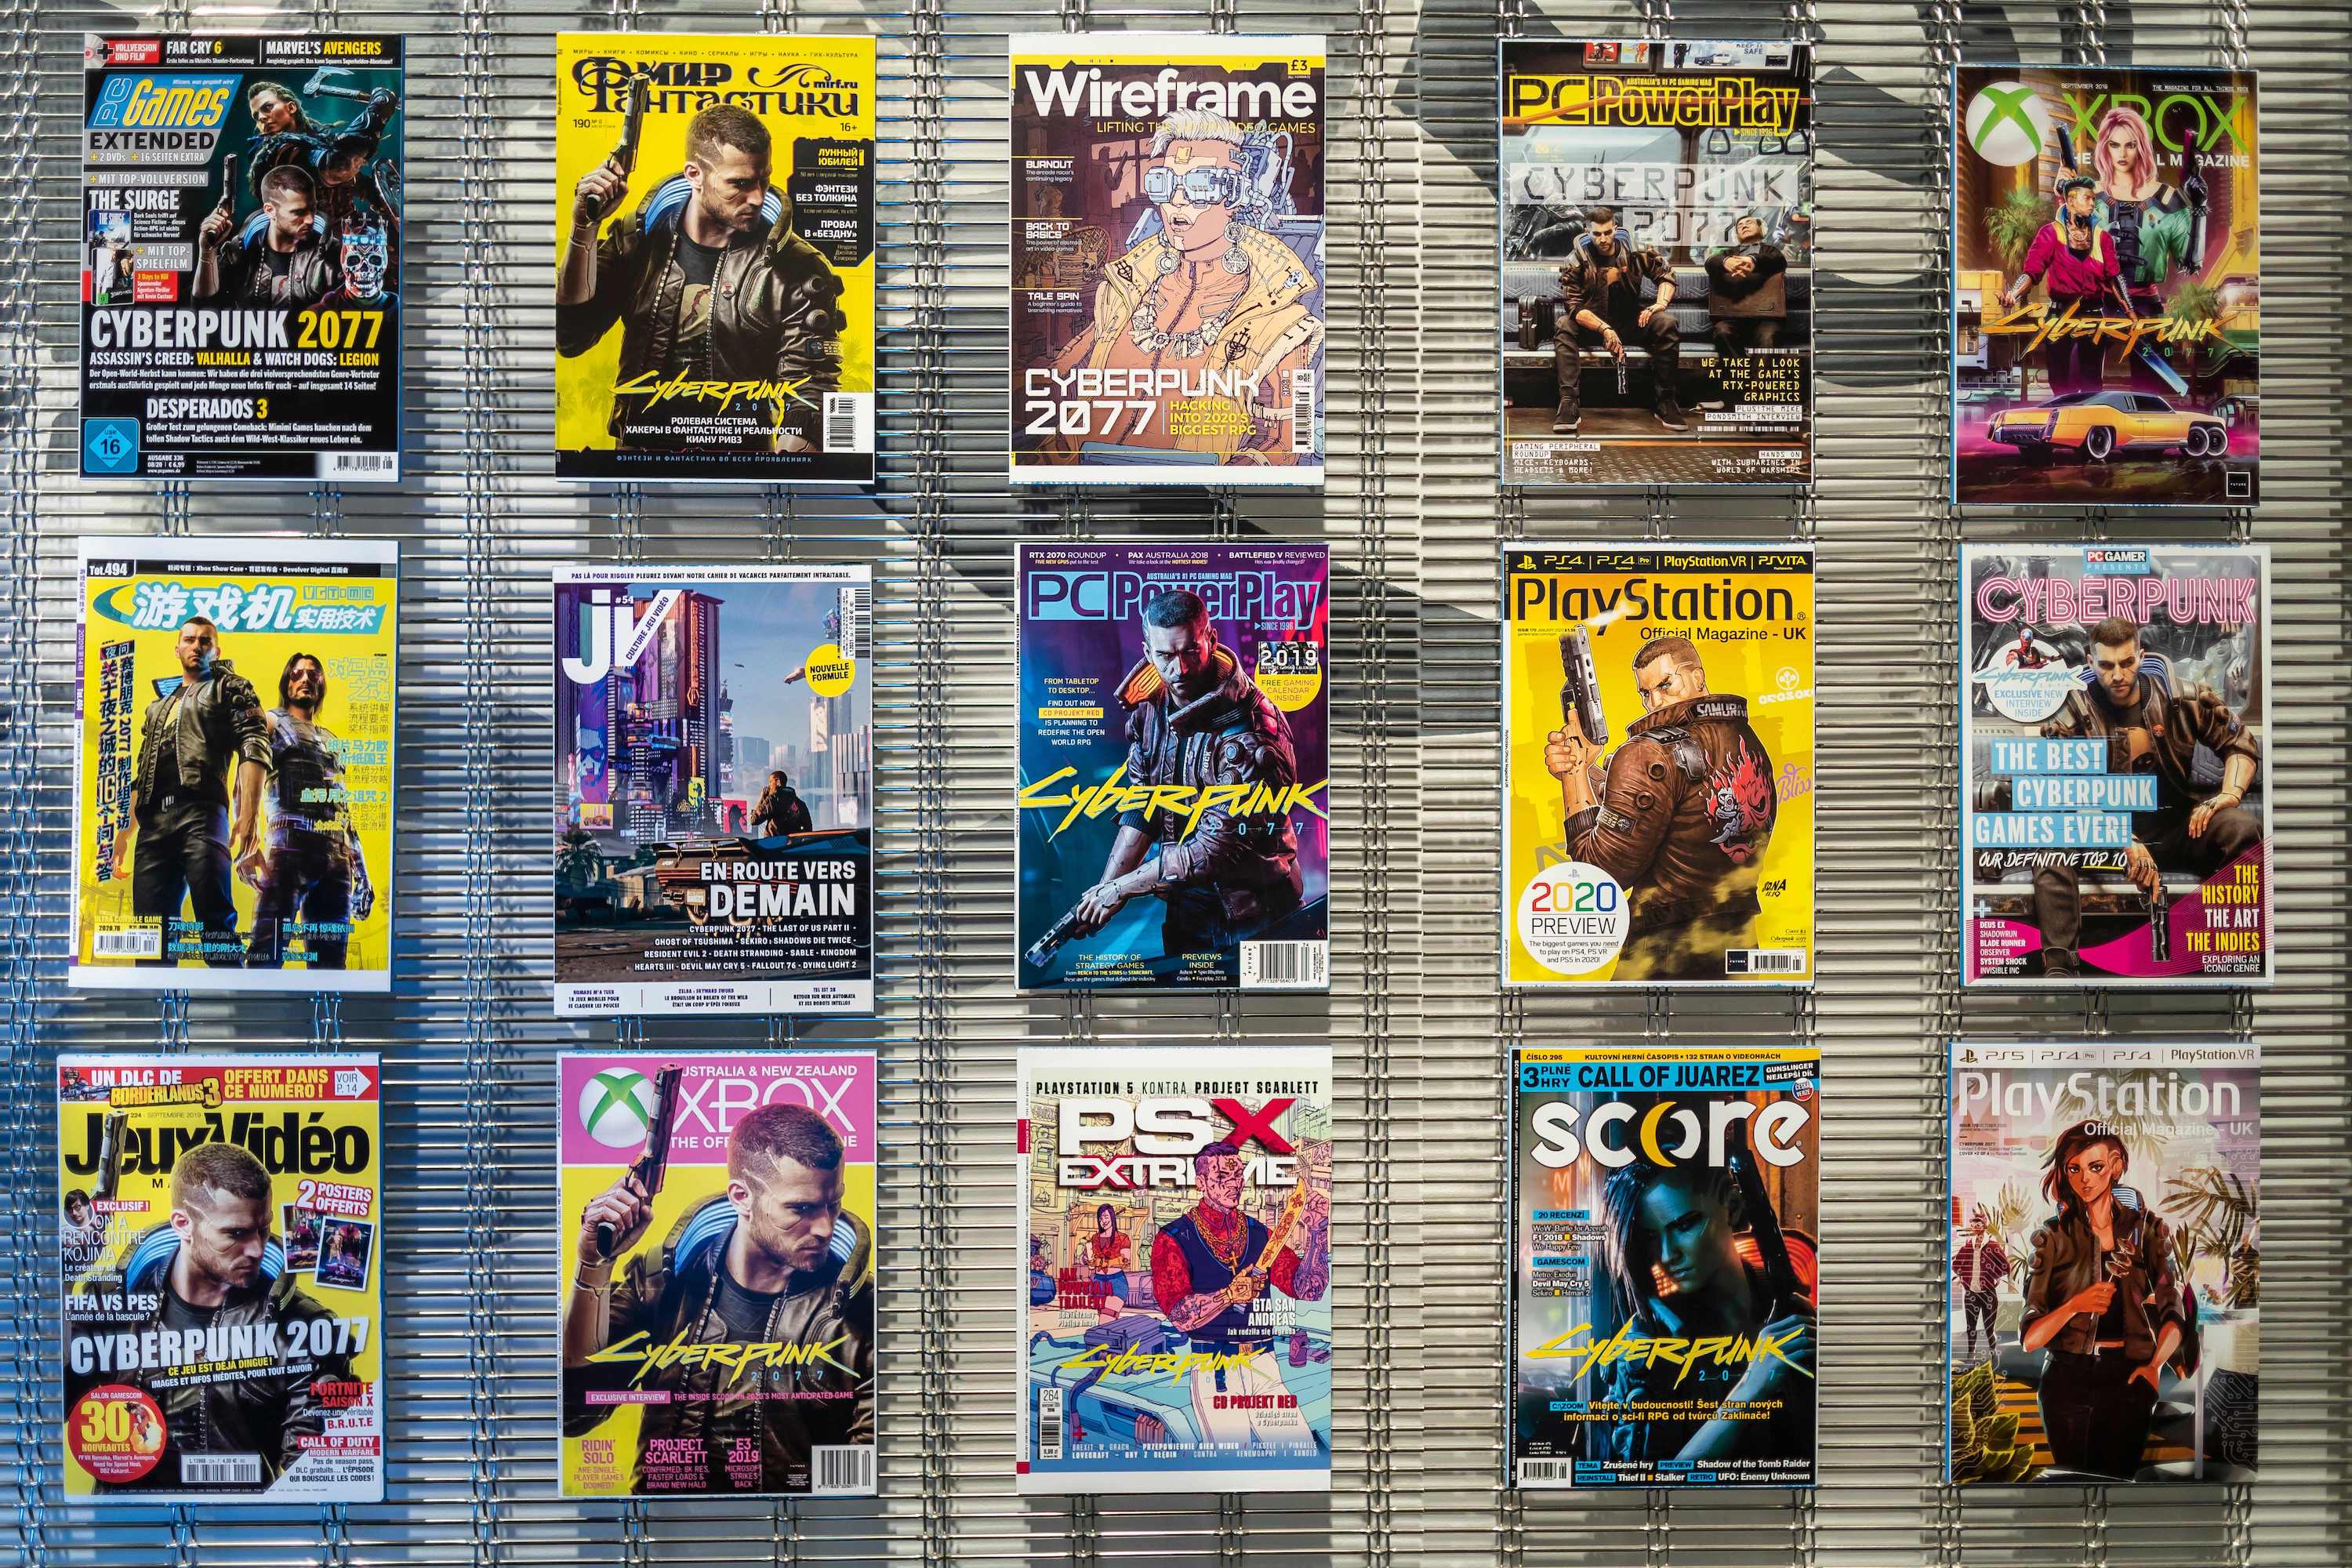 Magazine covers with Cyberpunk characters are seen in the headquarter of CD PROJECT - the most important polish game developer company, poses for a photo on December 4, 20202 before the expected release of Cyberpunk 2077 game, in Warsaw, Poland.